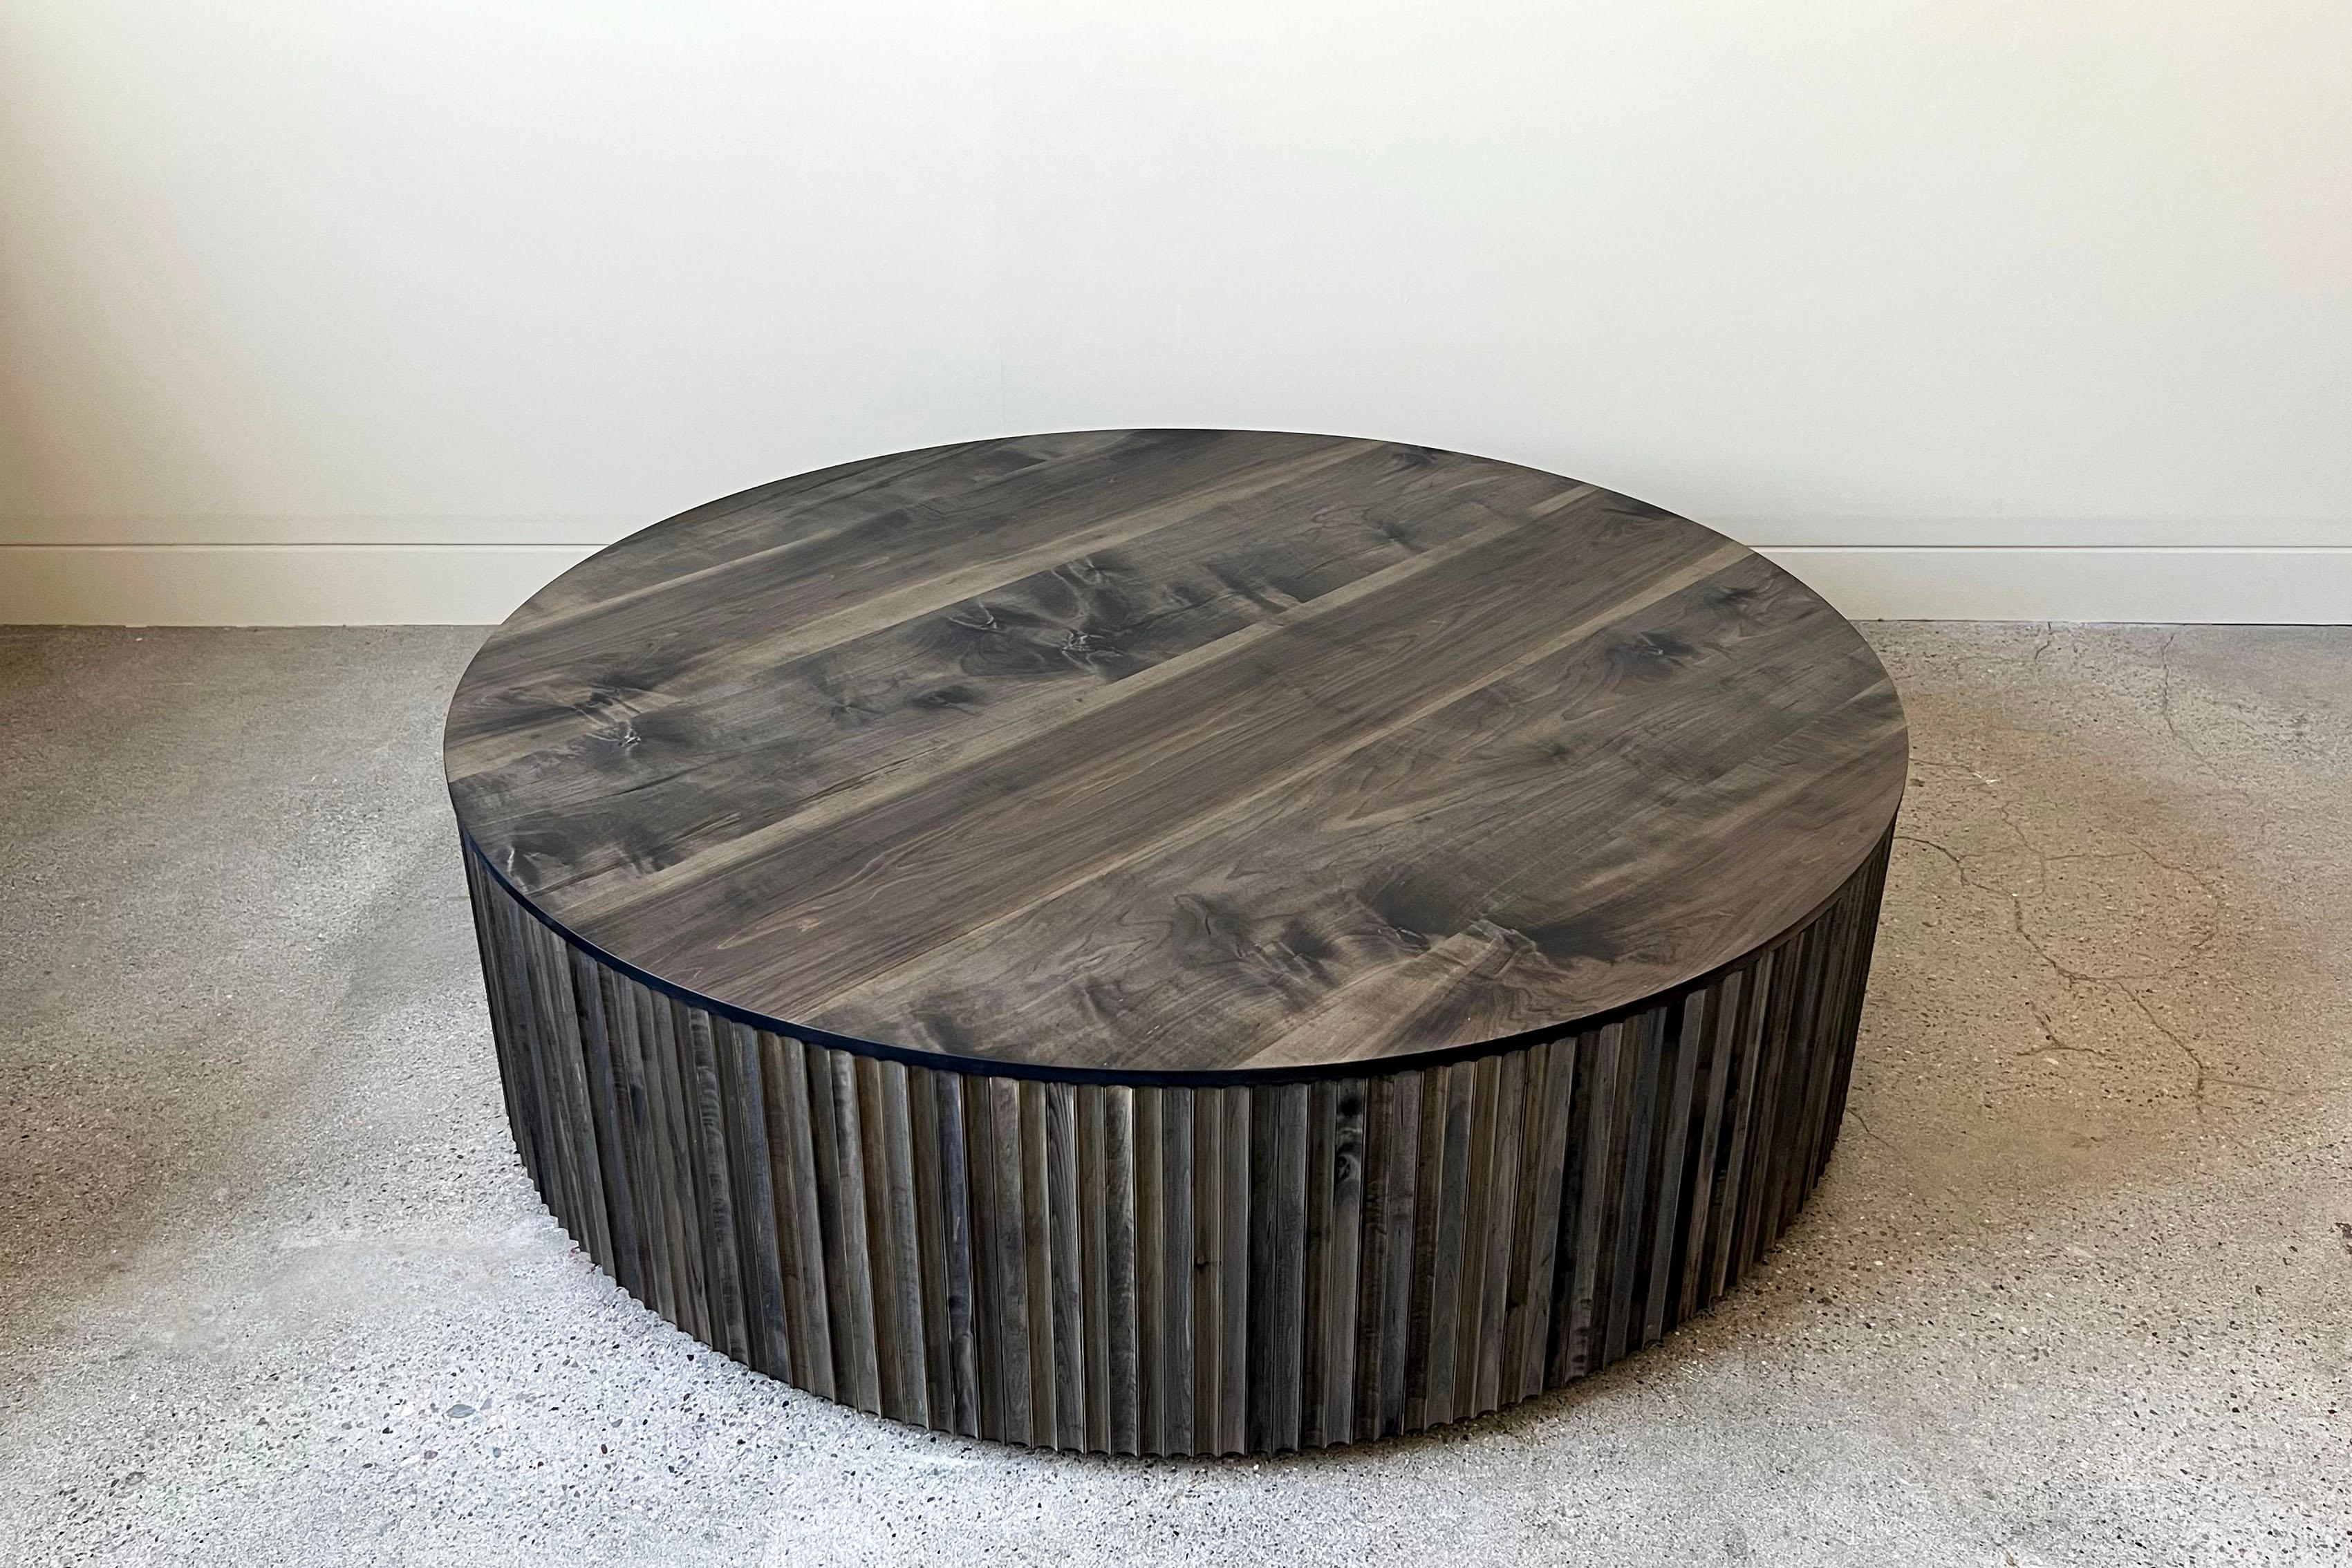 American Pilar Round Coffee Table Large / Oxidized Maple Wood by INDO- For Sale